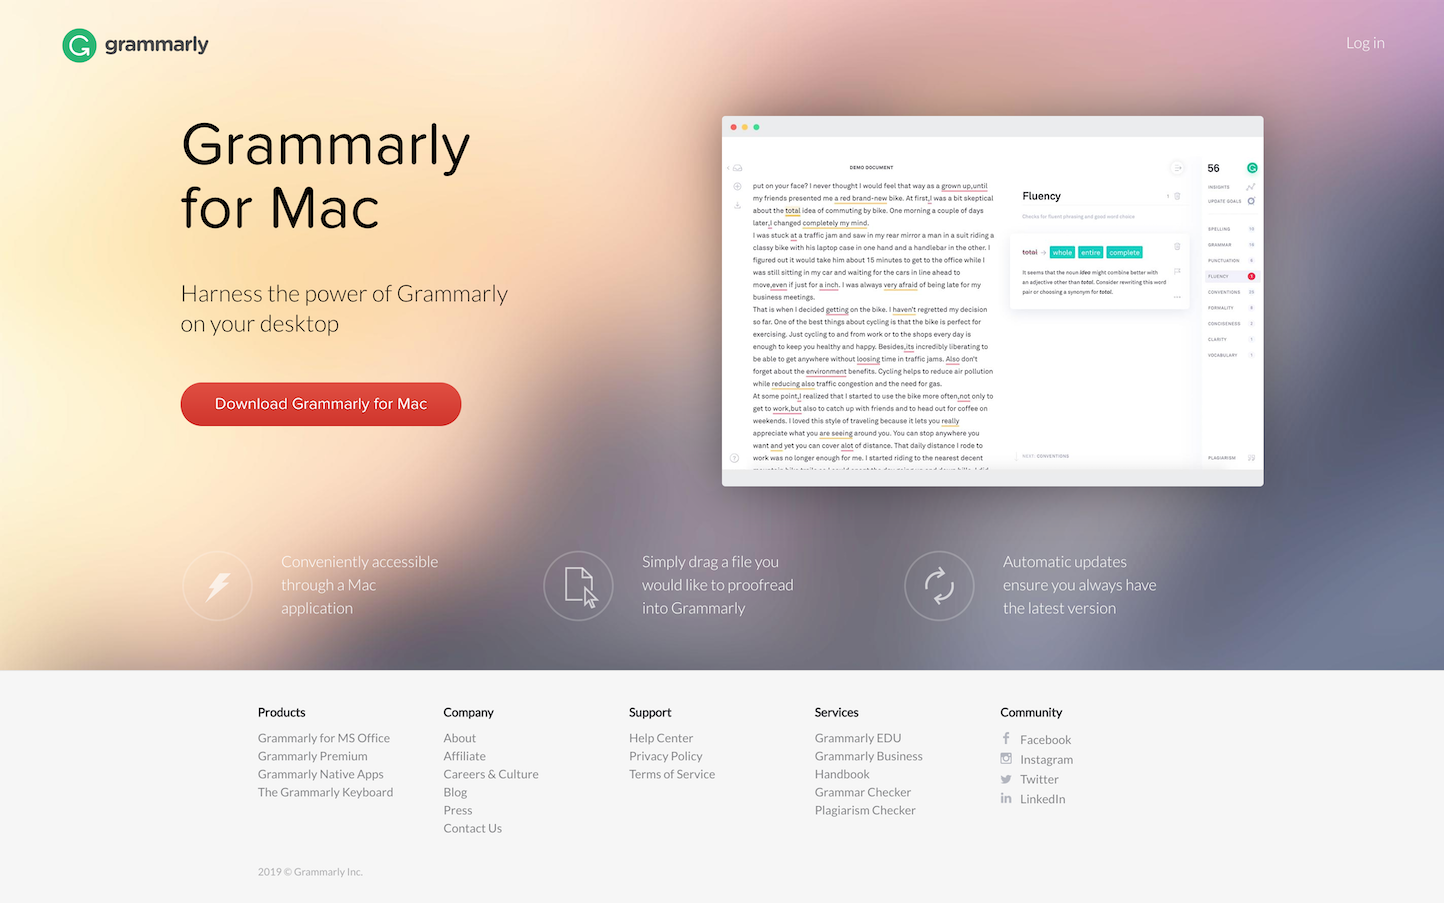 Screenshot of the Product - for Mac page from the Grammarly website.